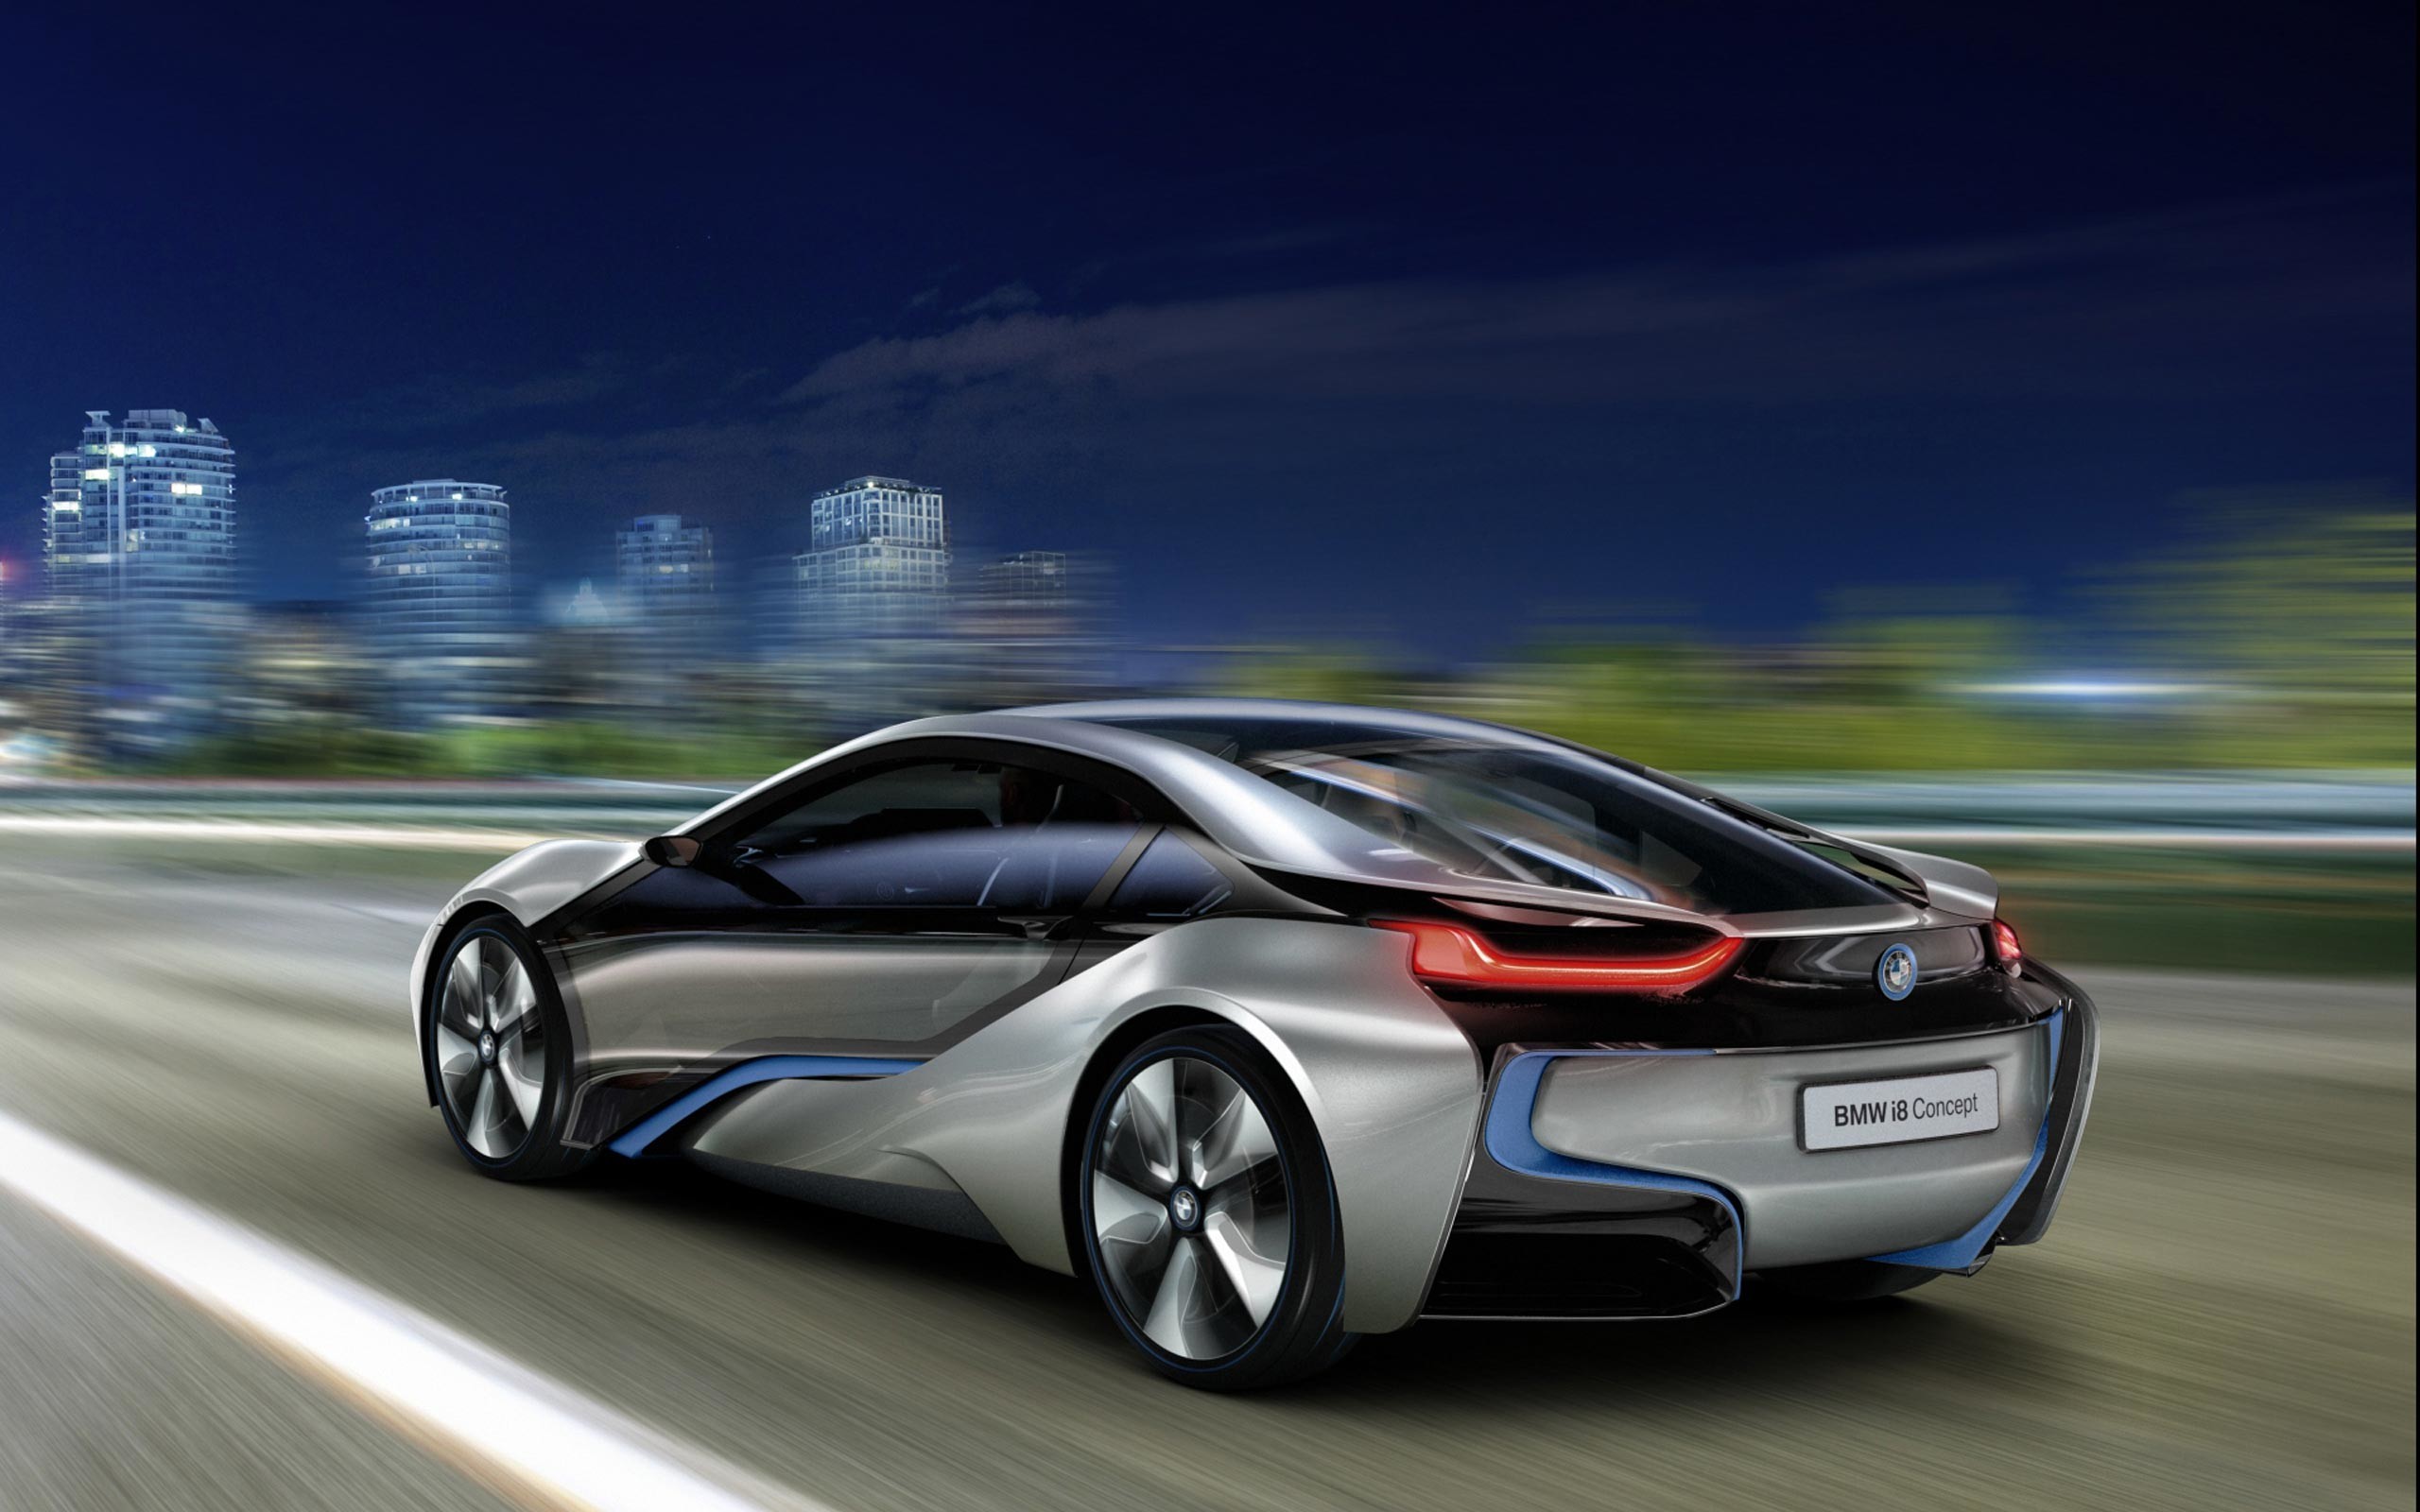 2560x1600 Related Wallpapers from Exotic Cars. Amazing BMW i8 Wallpaper